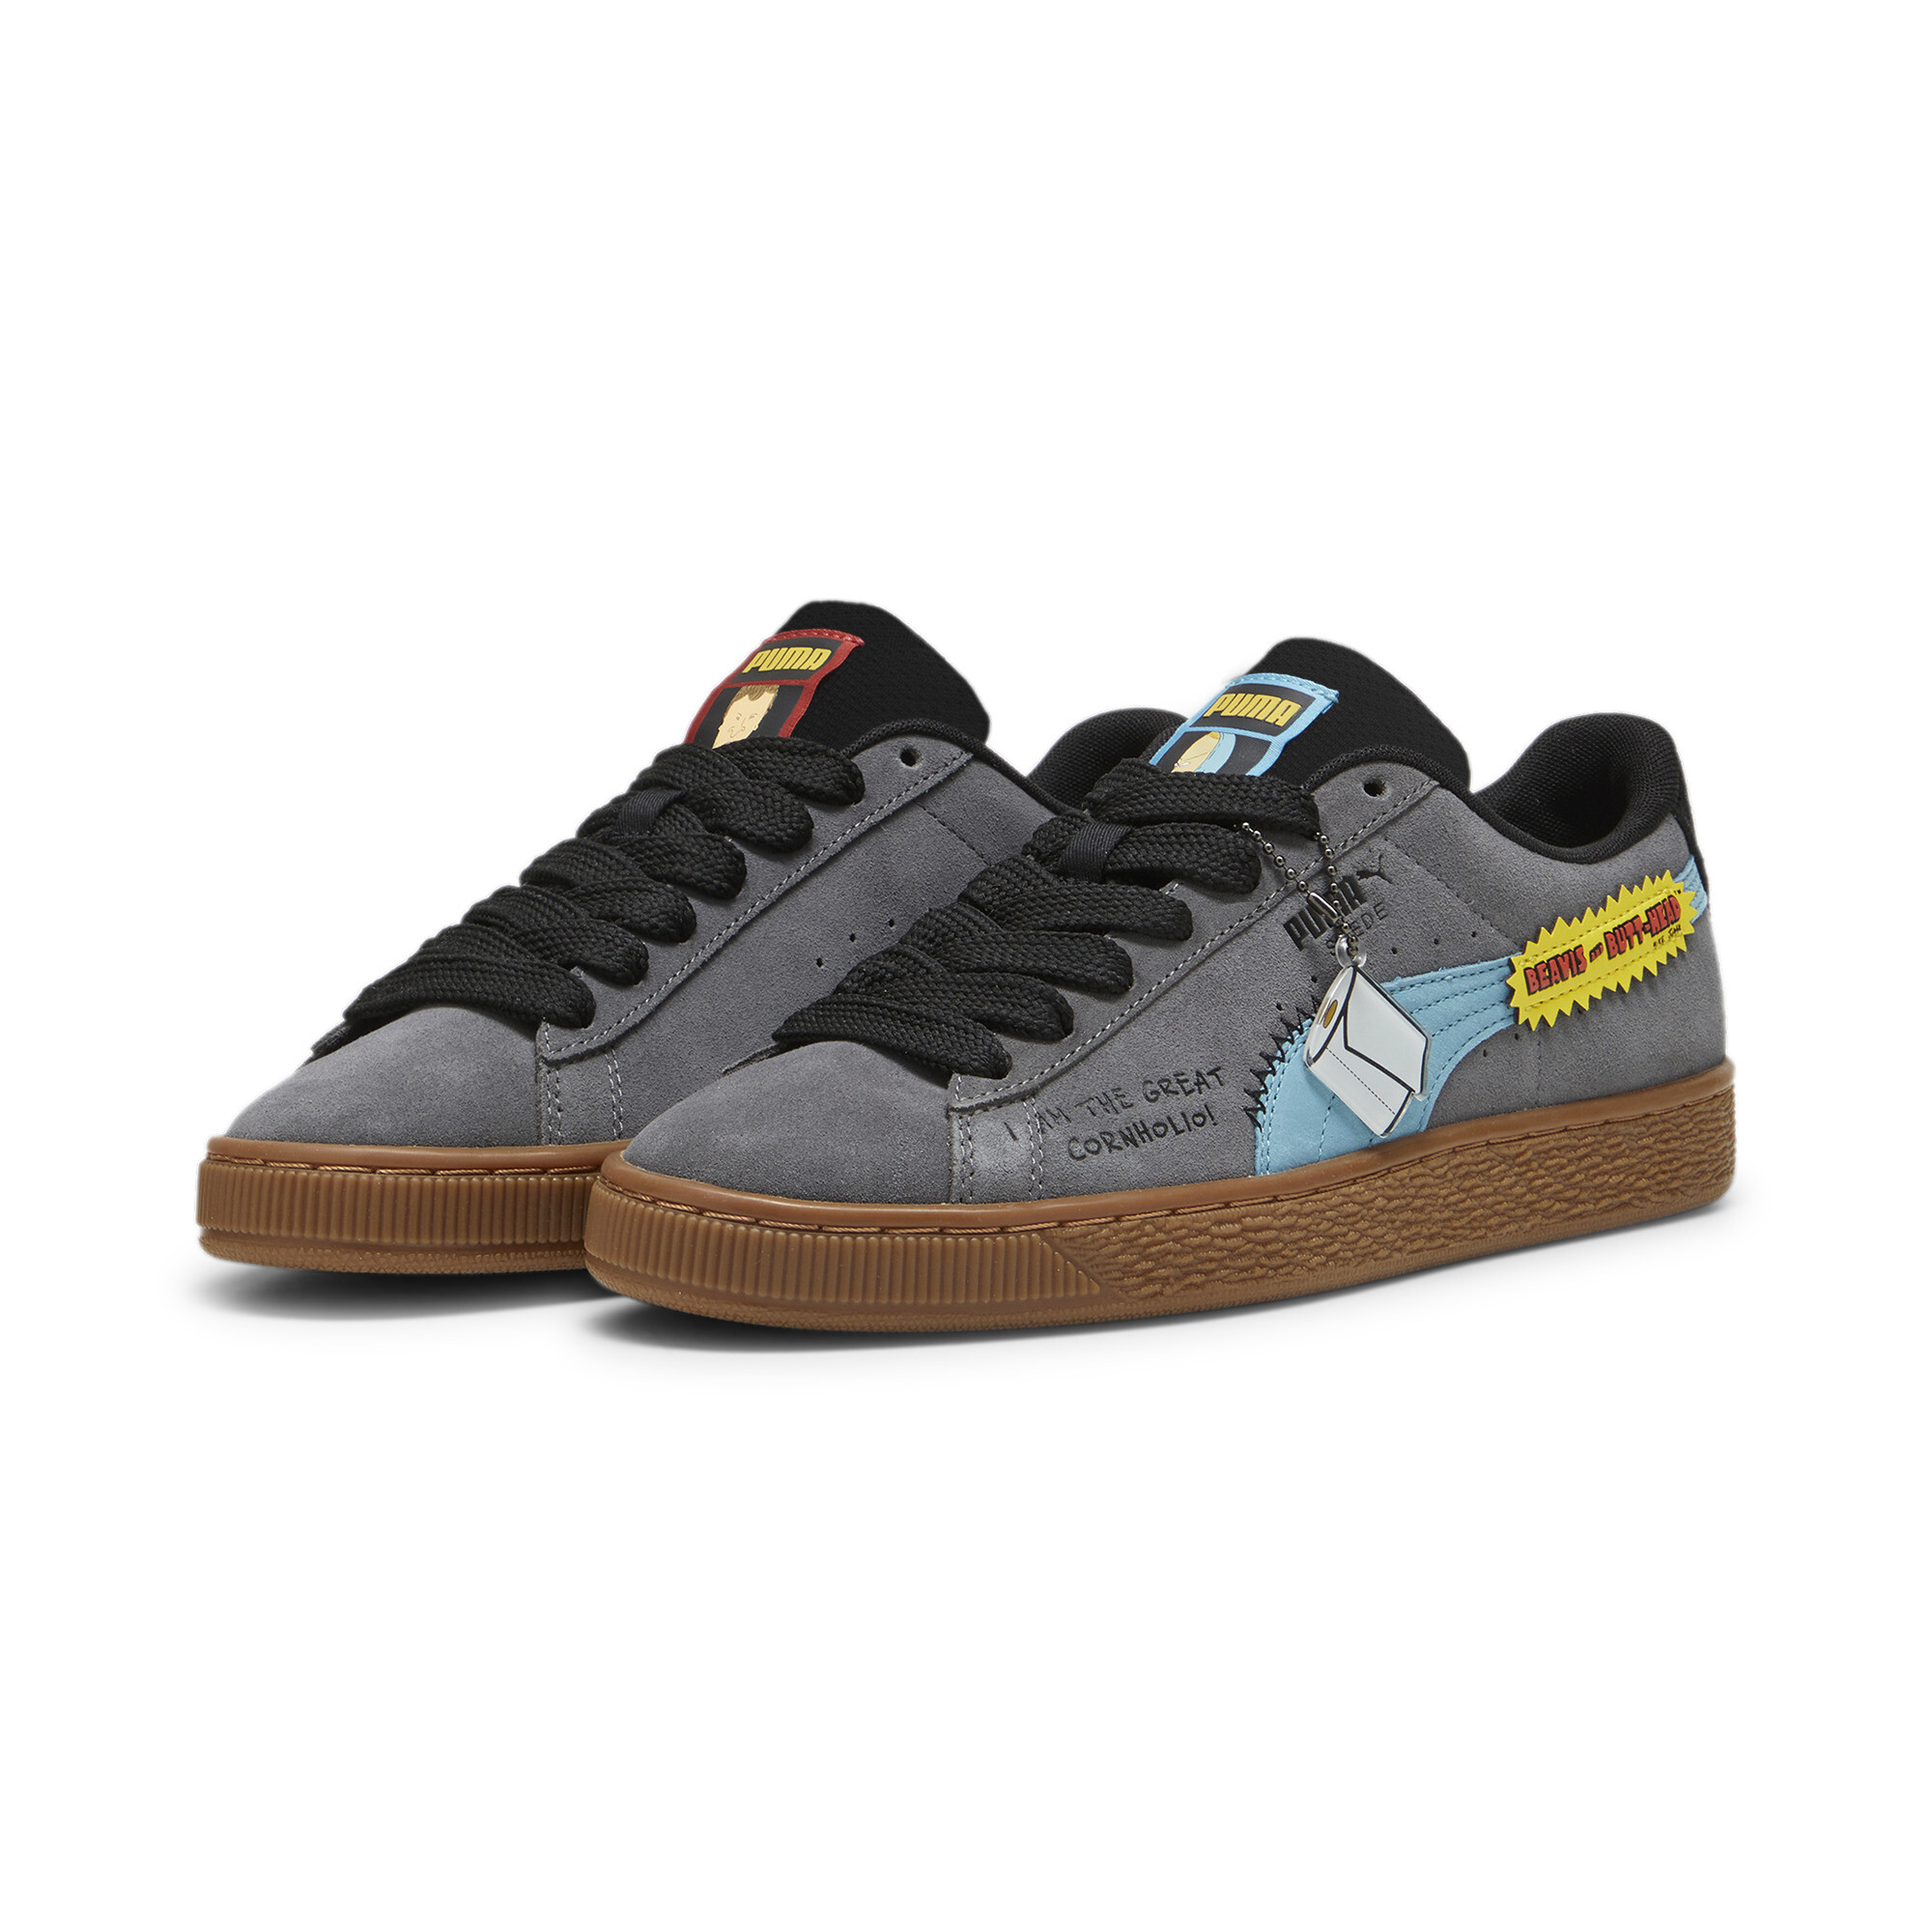 Kids' PUMA X BEAVIS AND BUTTHEAD Suede Sneakers In Gray, Size EU 44